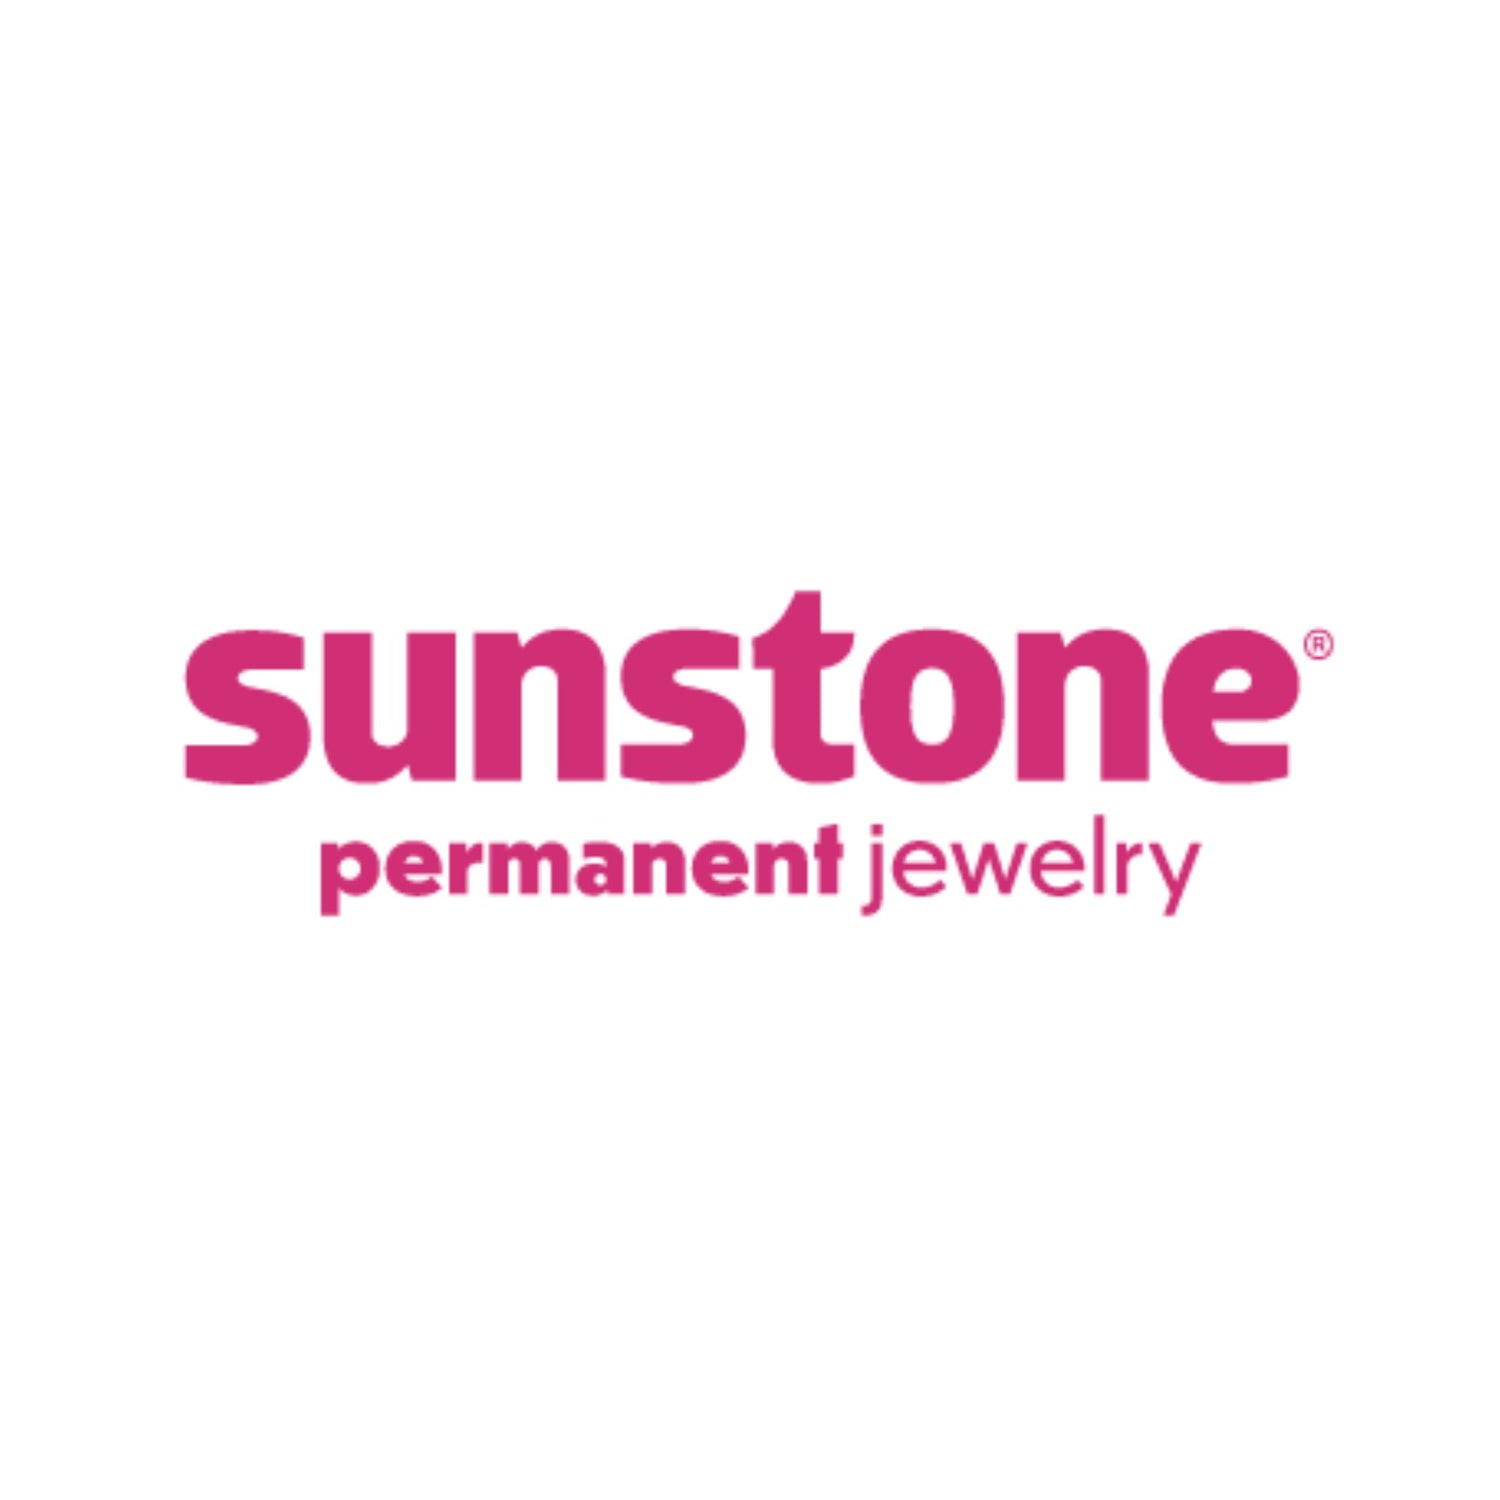 Why Start Your Success Story with Sunstone?